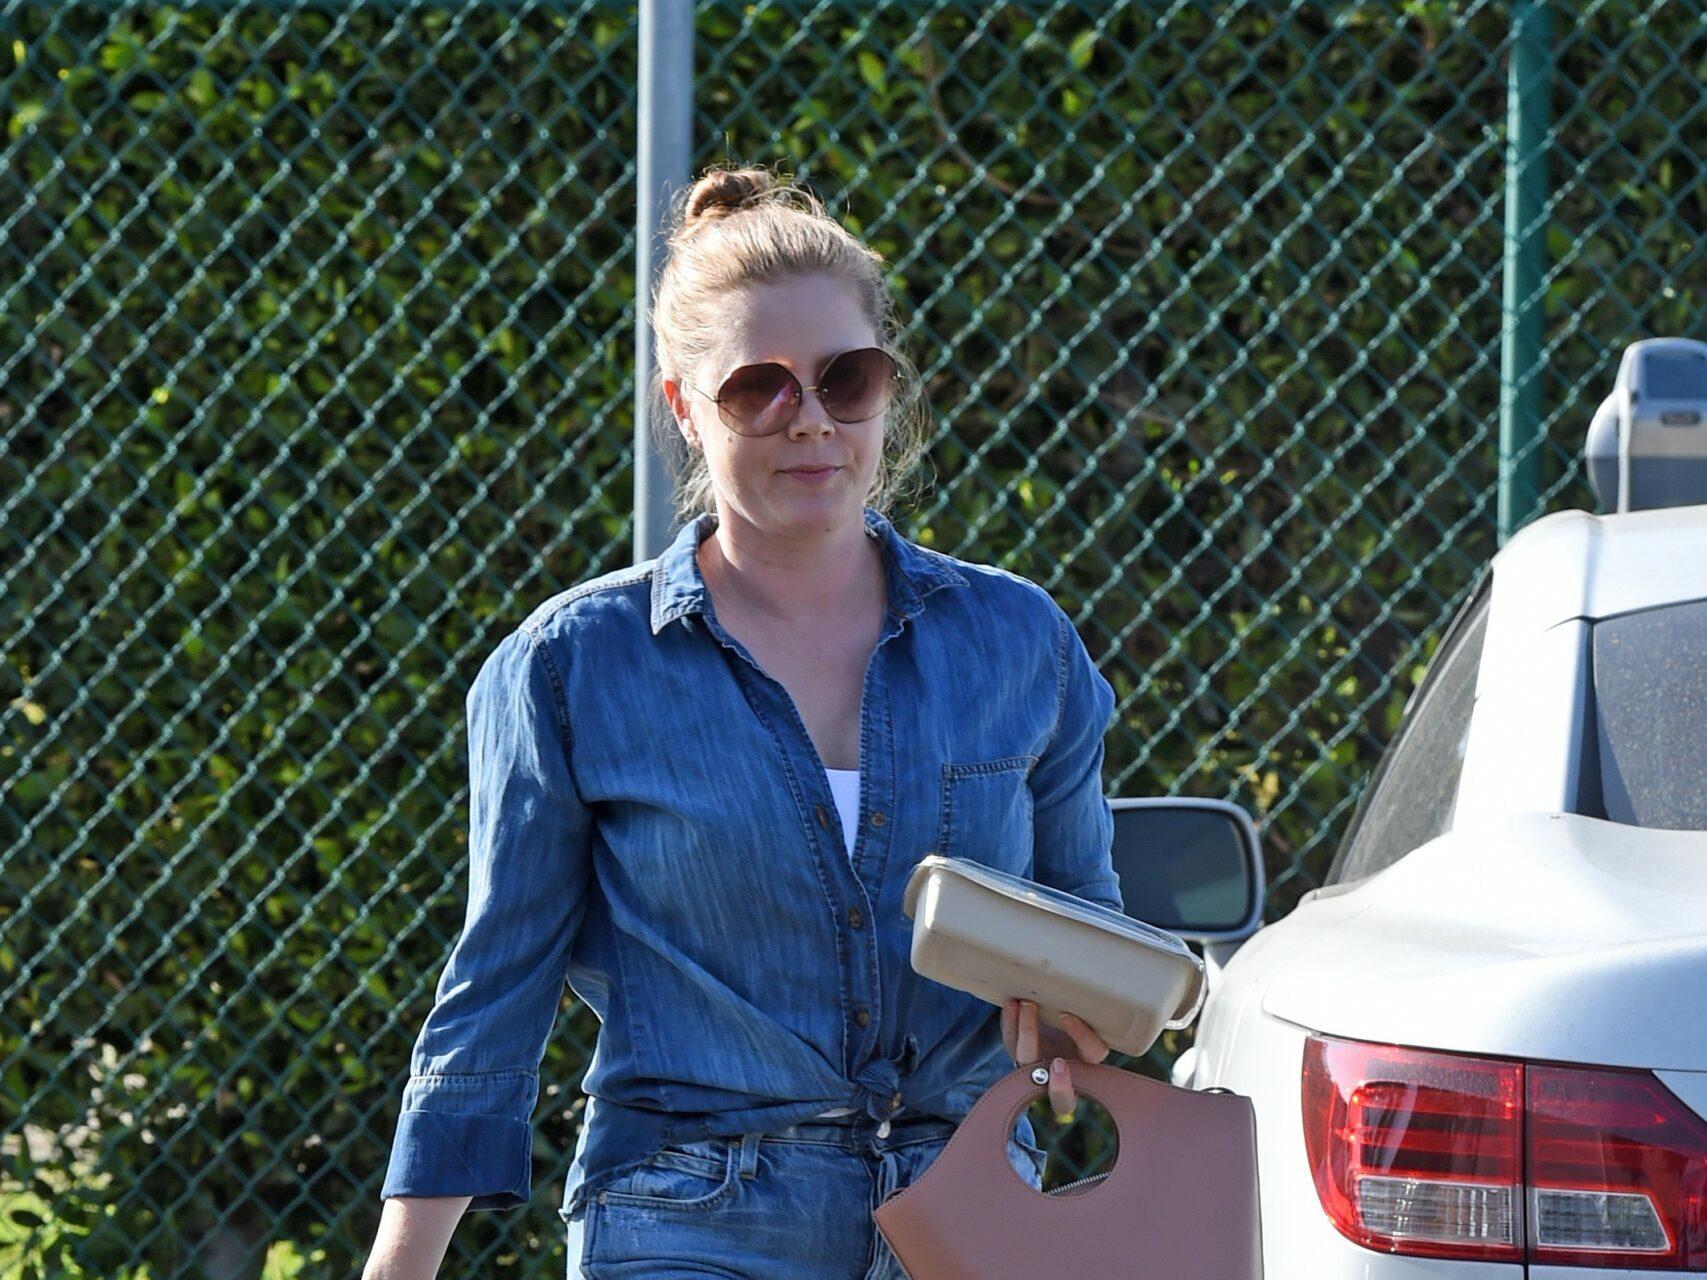 Amy Adams sports a double denim outfit